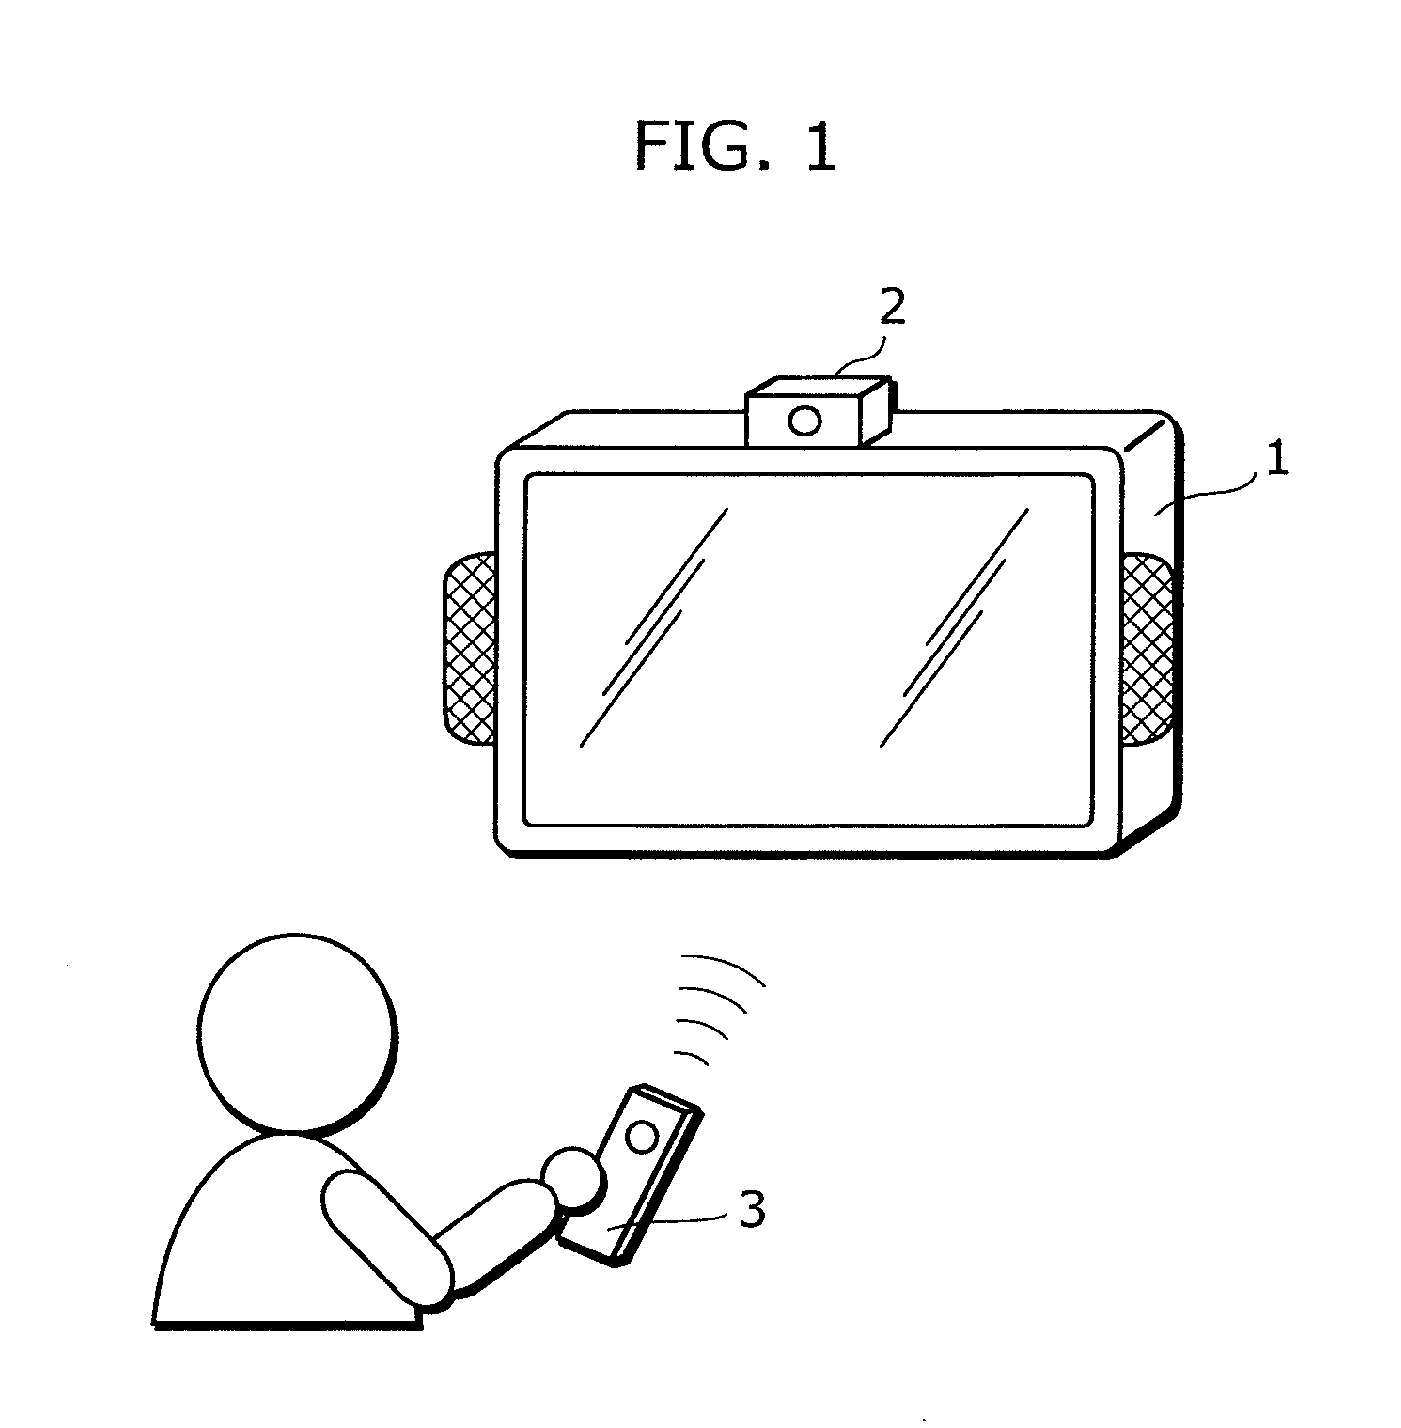 Human state estimating device and method